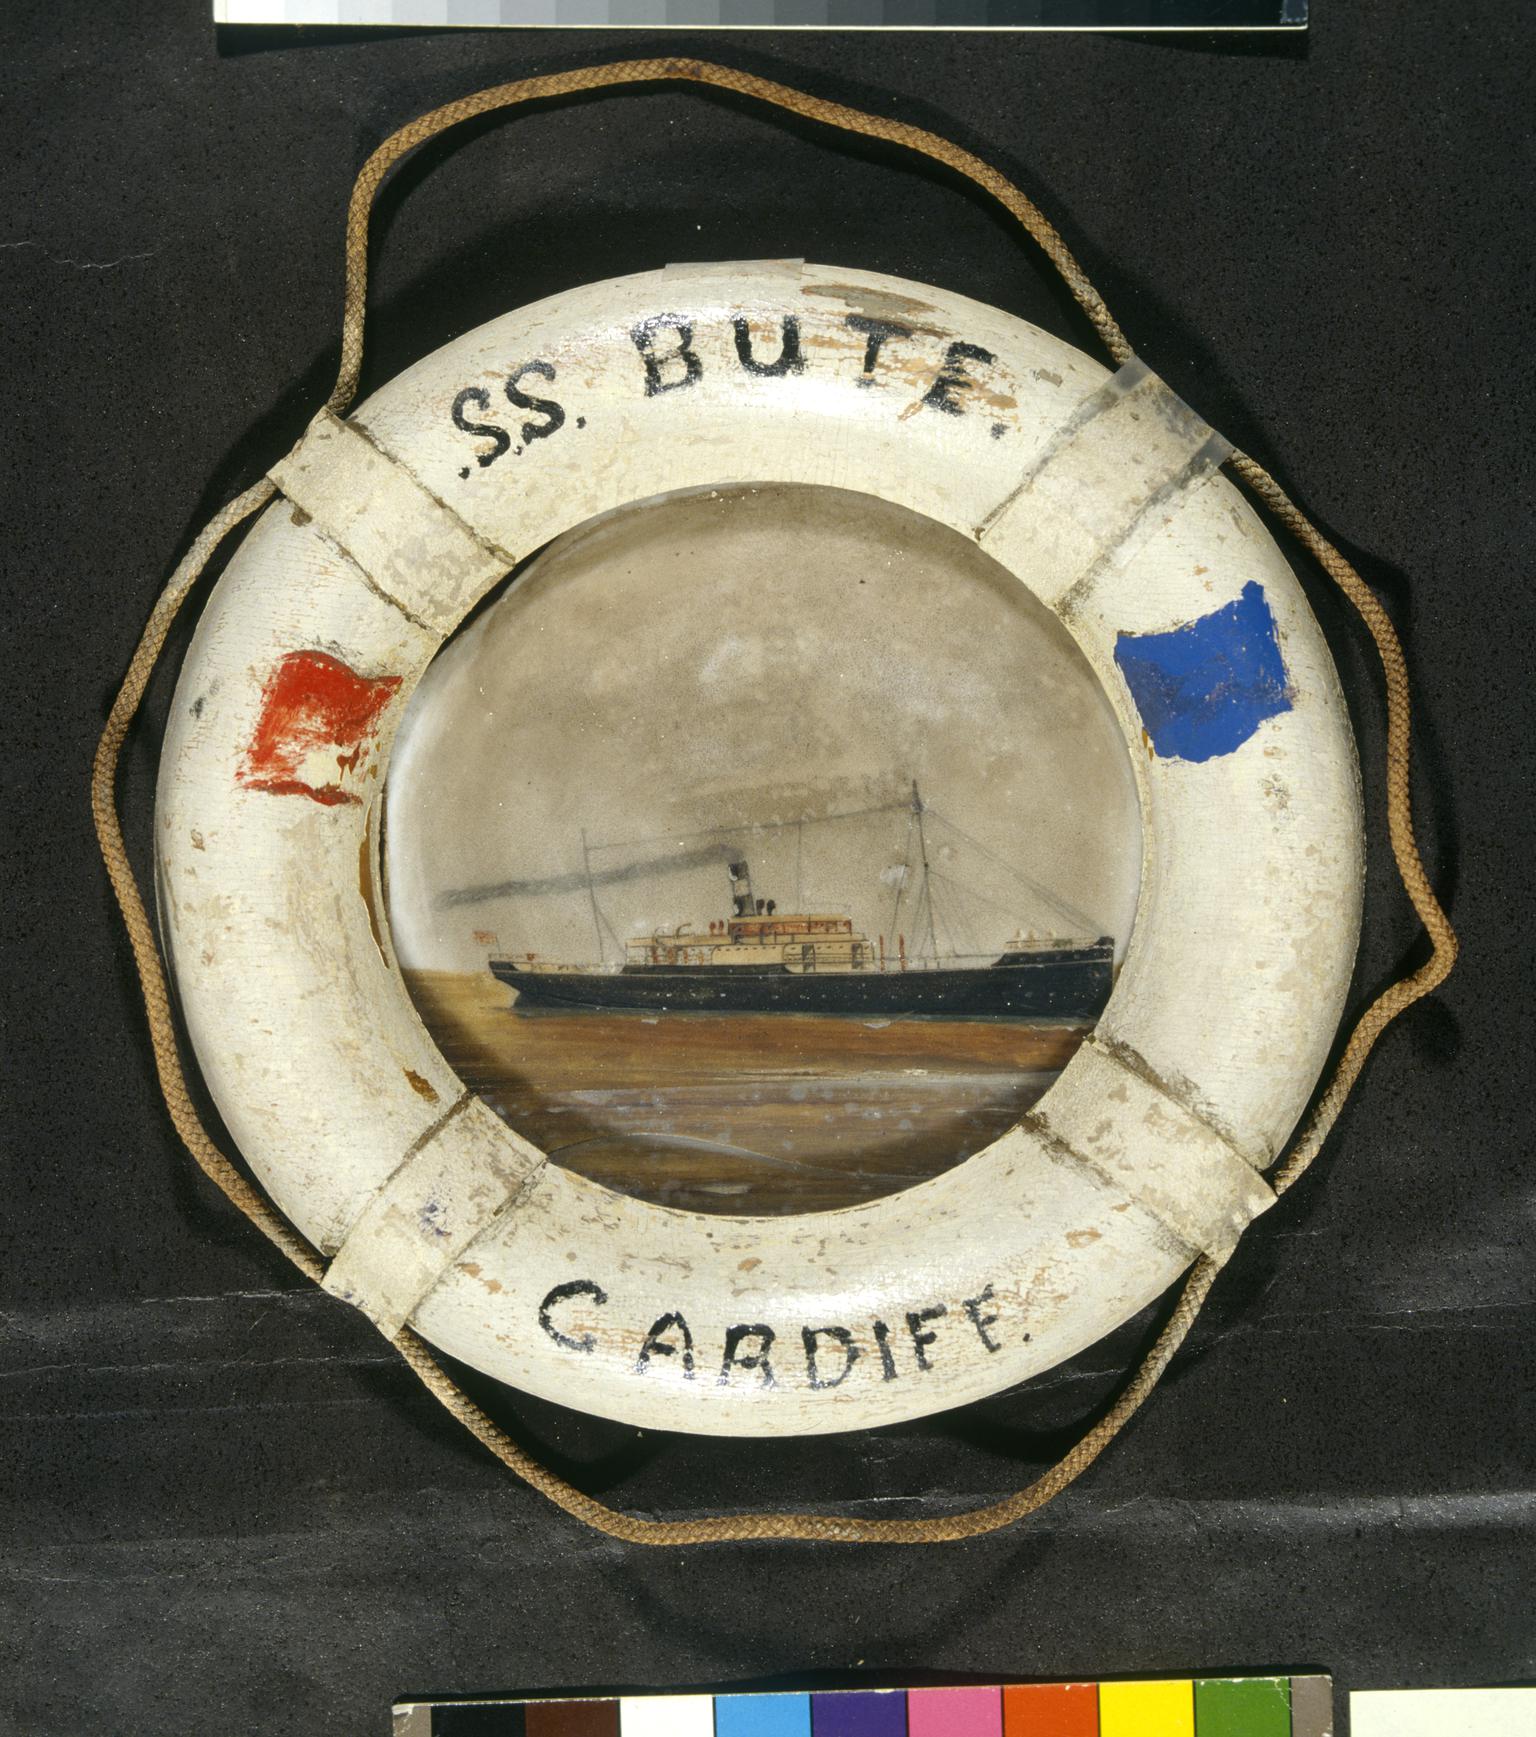 S.S. BUTE, Cardiff (painting)